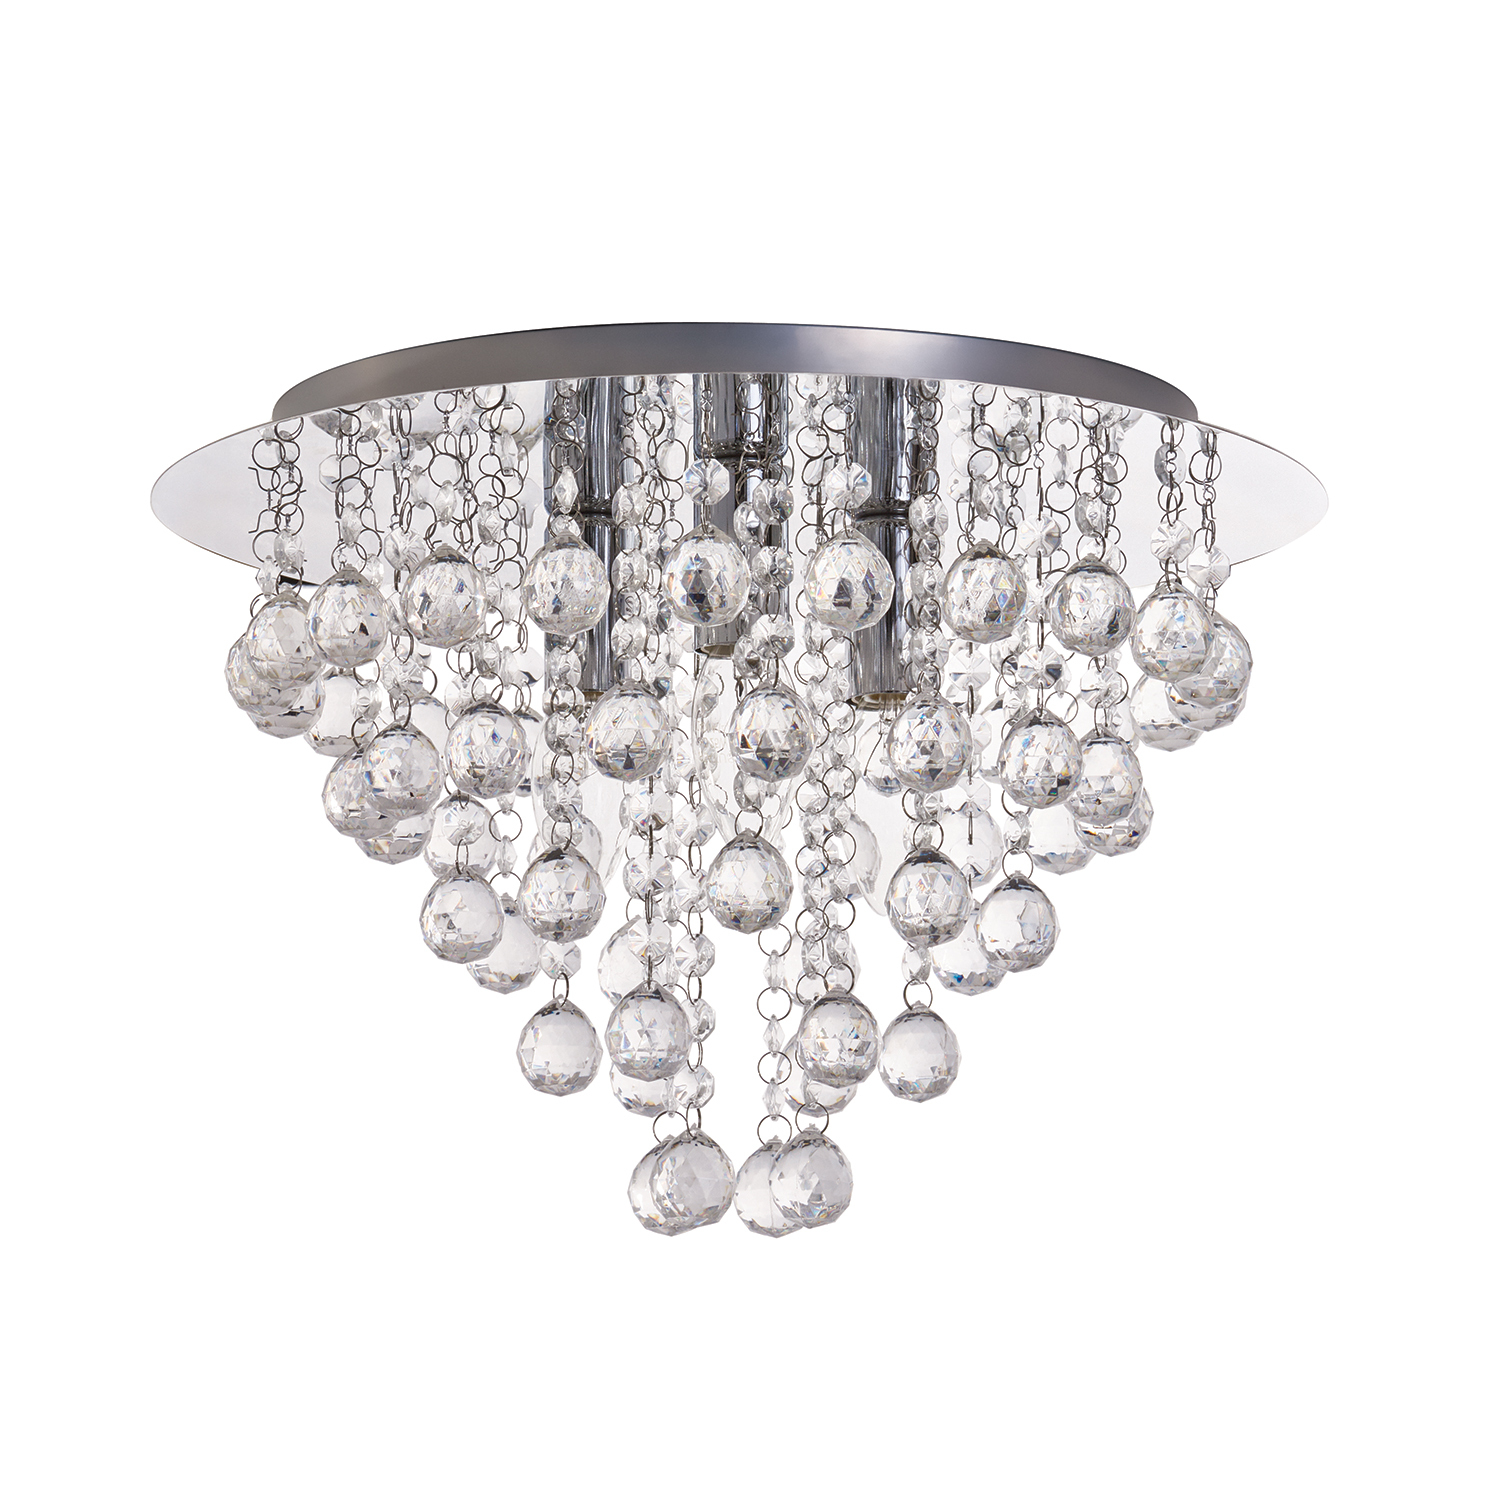 Lexy Silver 3 Light Fitting Ceiling Light Image 3